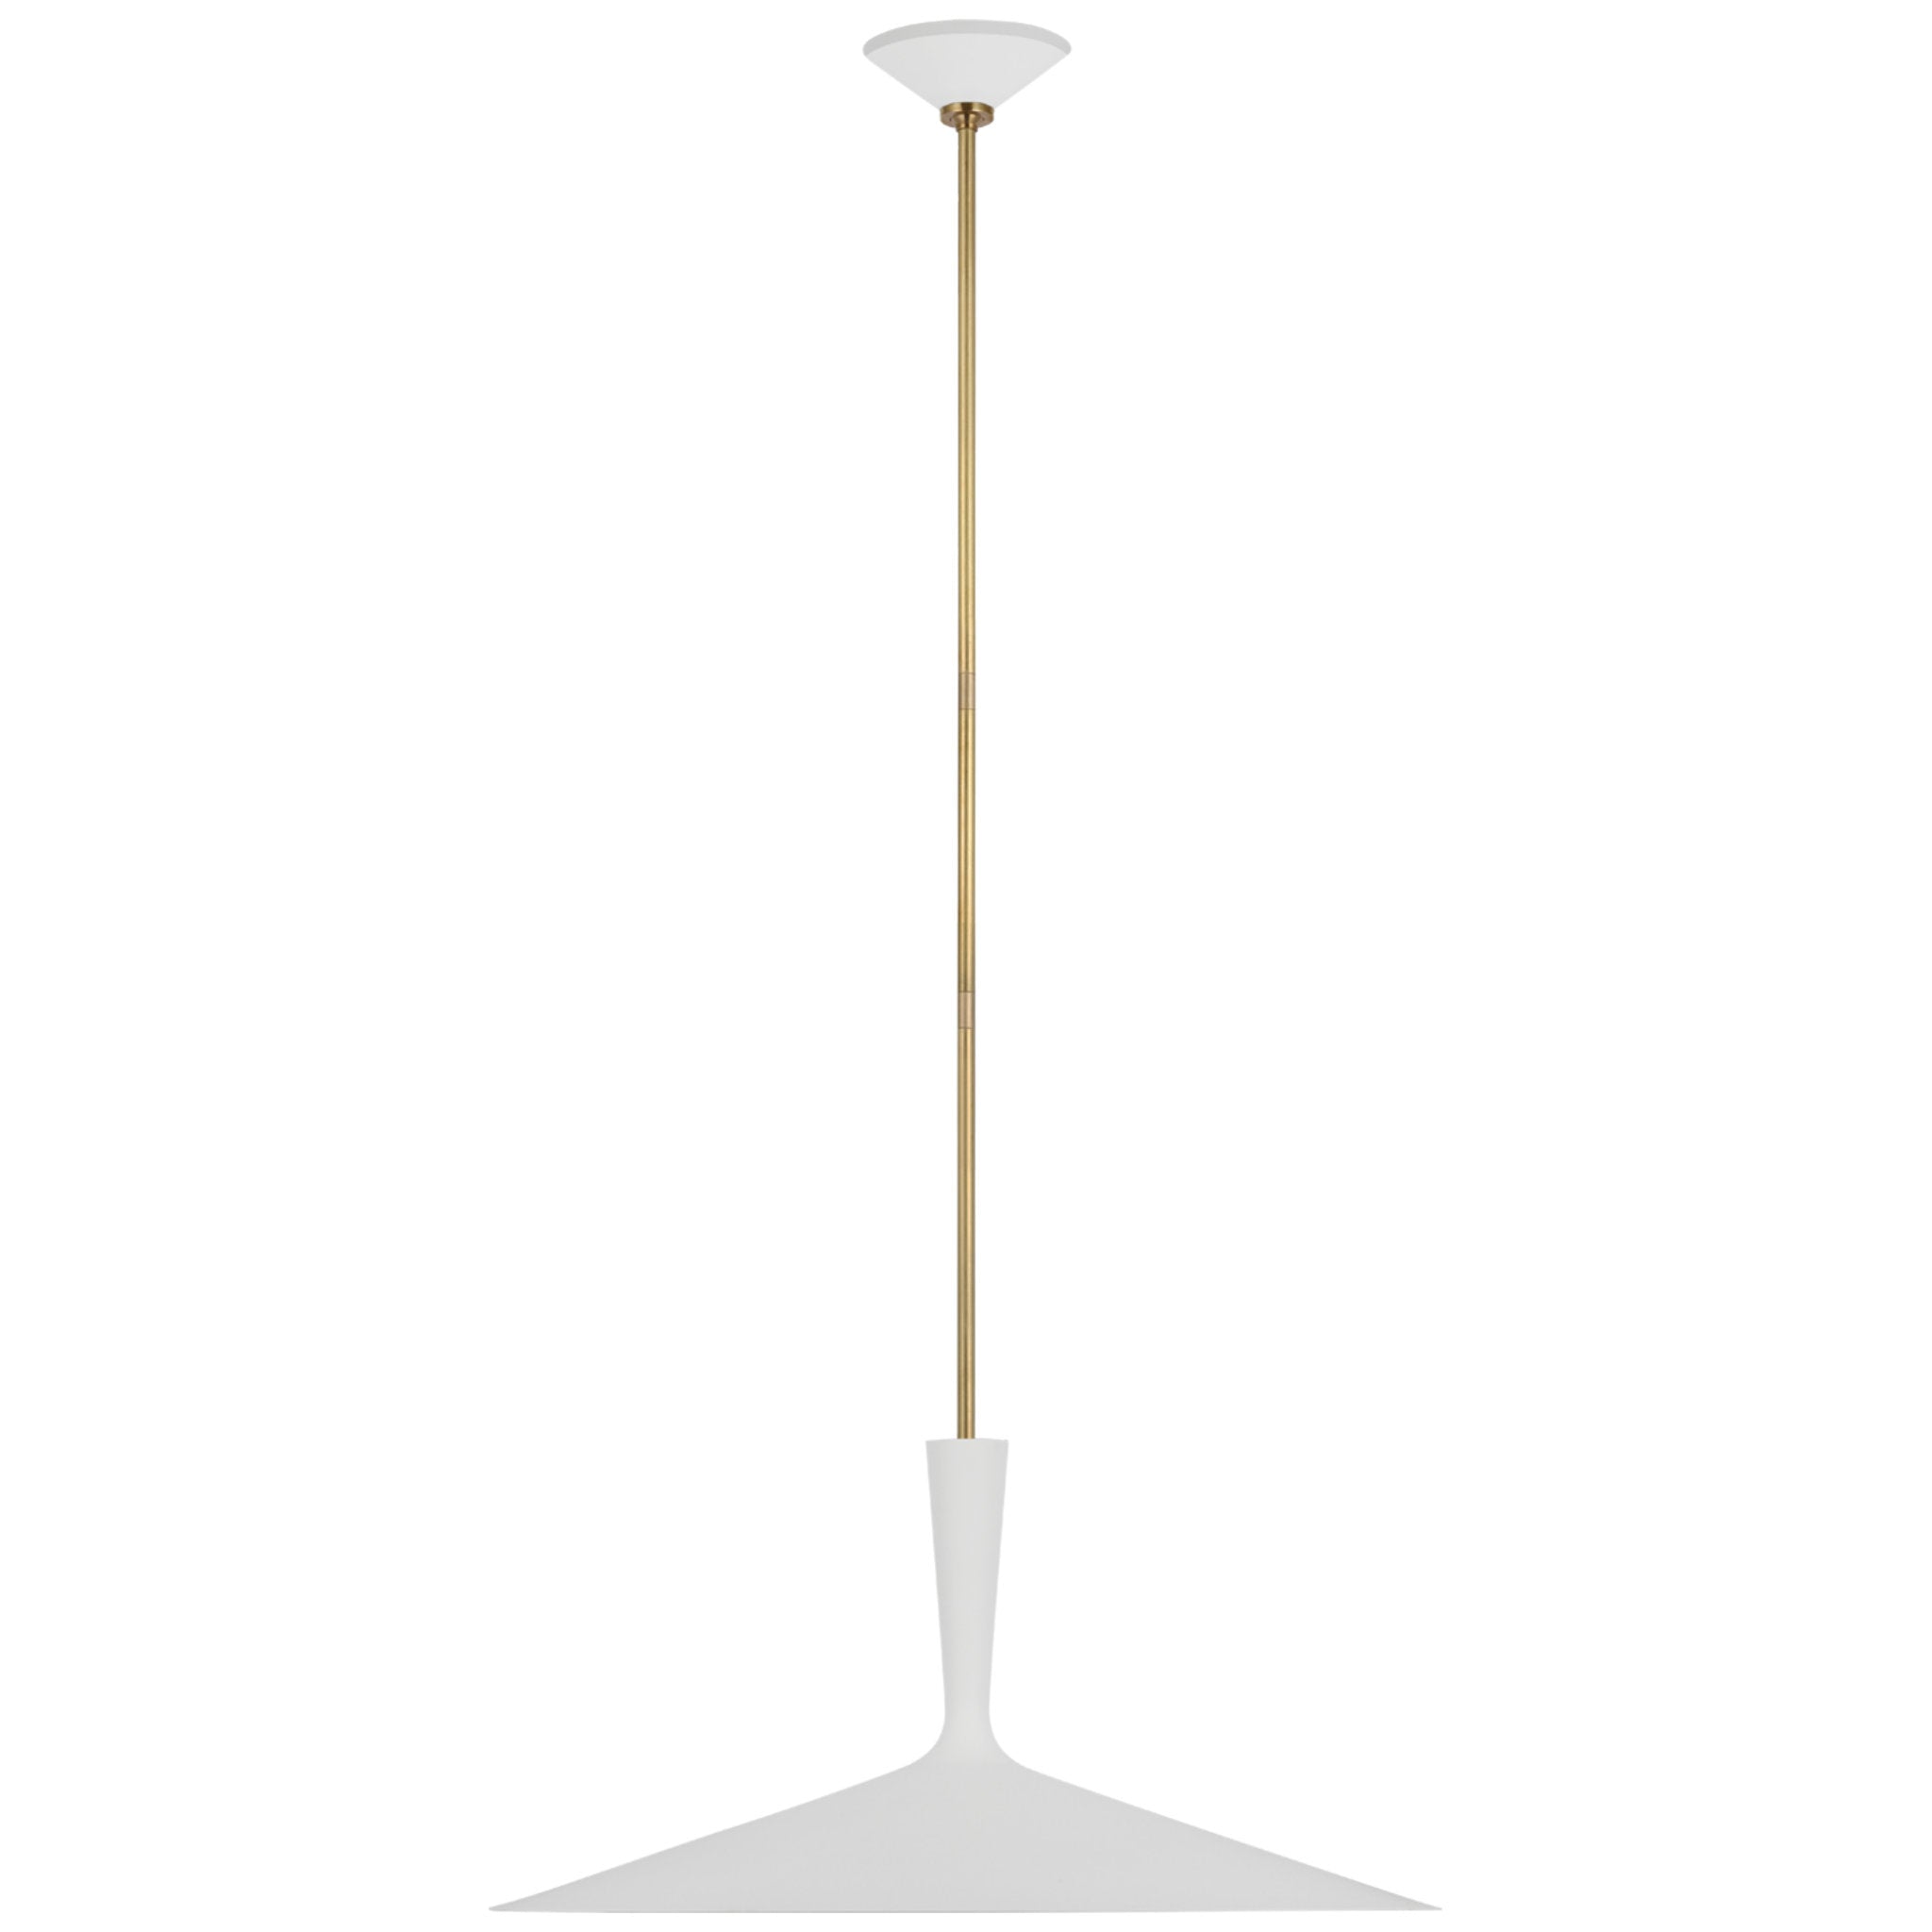 AERIN Rosetta XL Pendant in Matte White and Hand-Rubbed Antique Brass